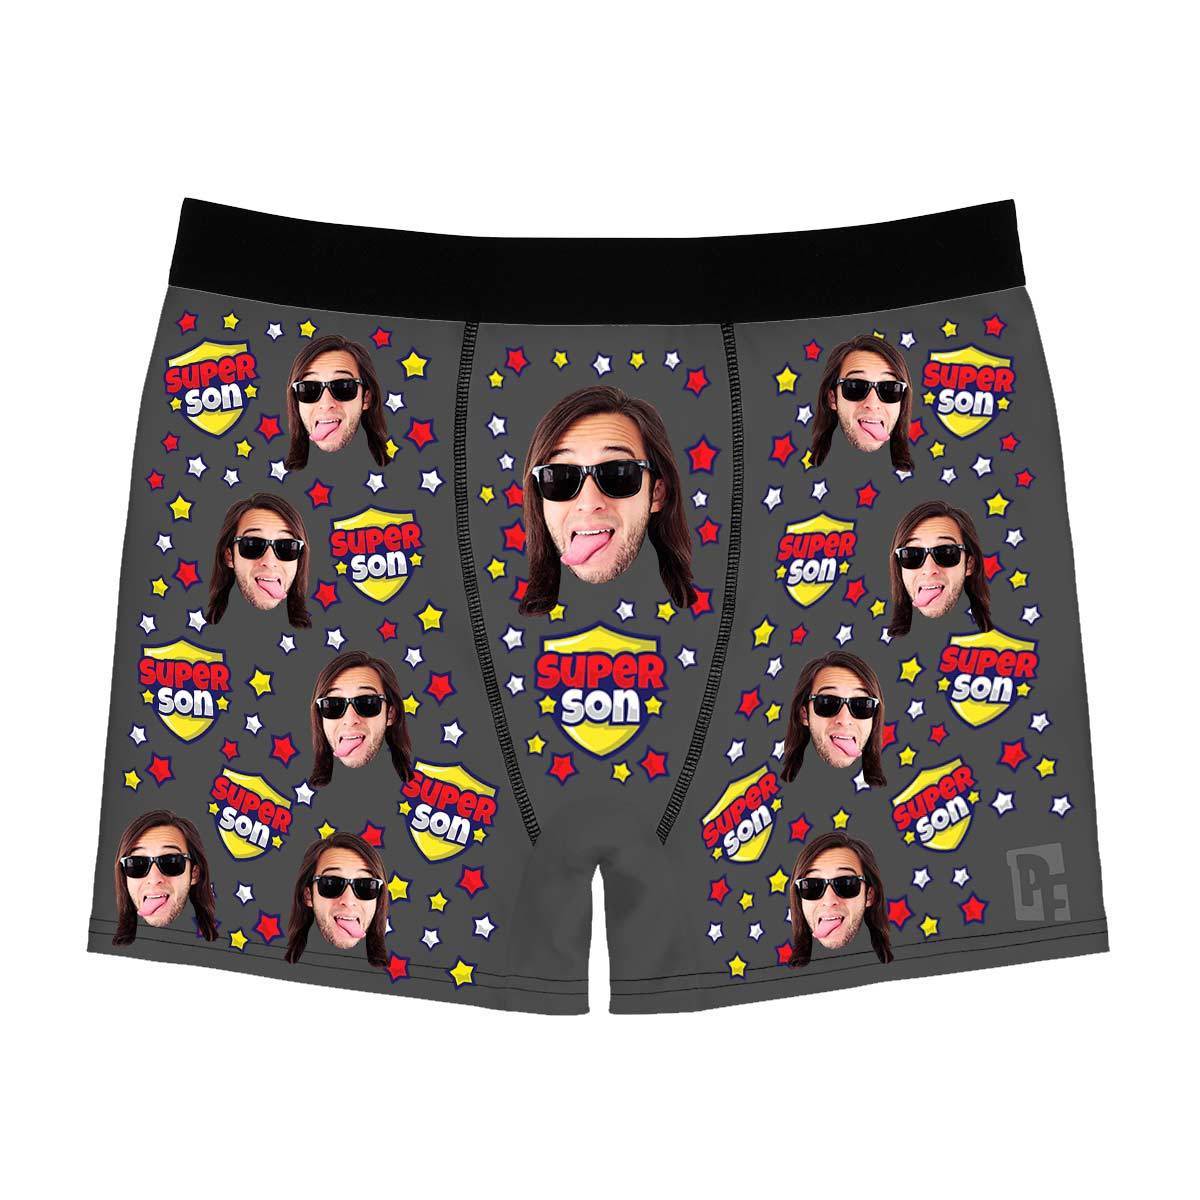 Dark Super son men's boxer briefs personalized with photo printed on them